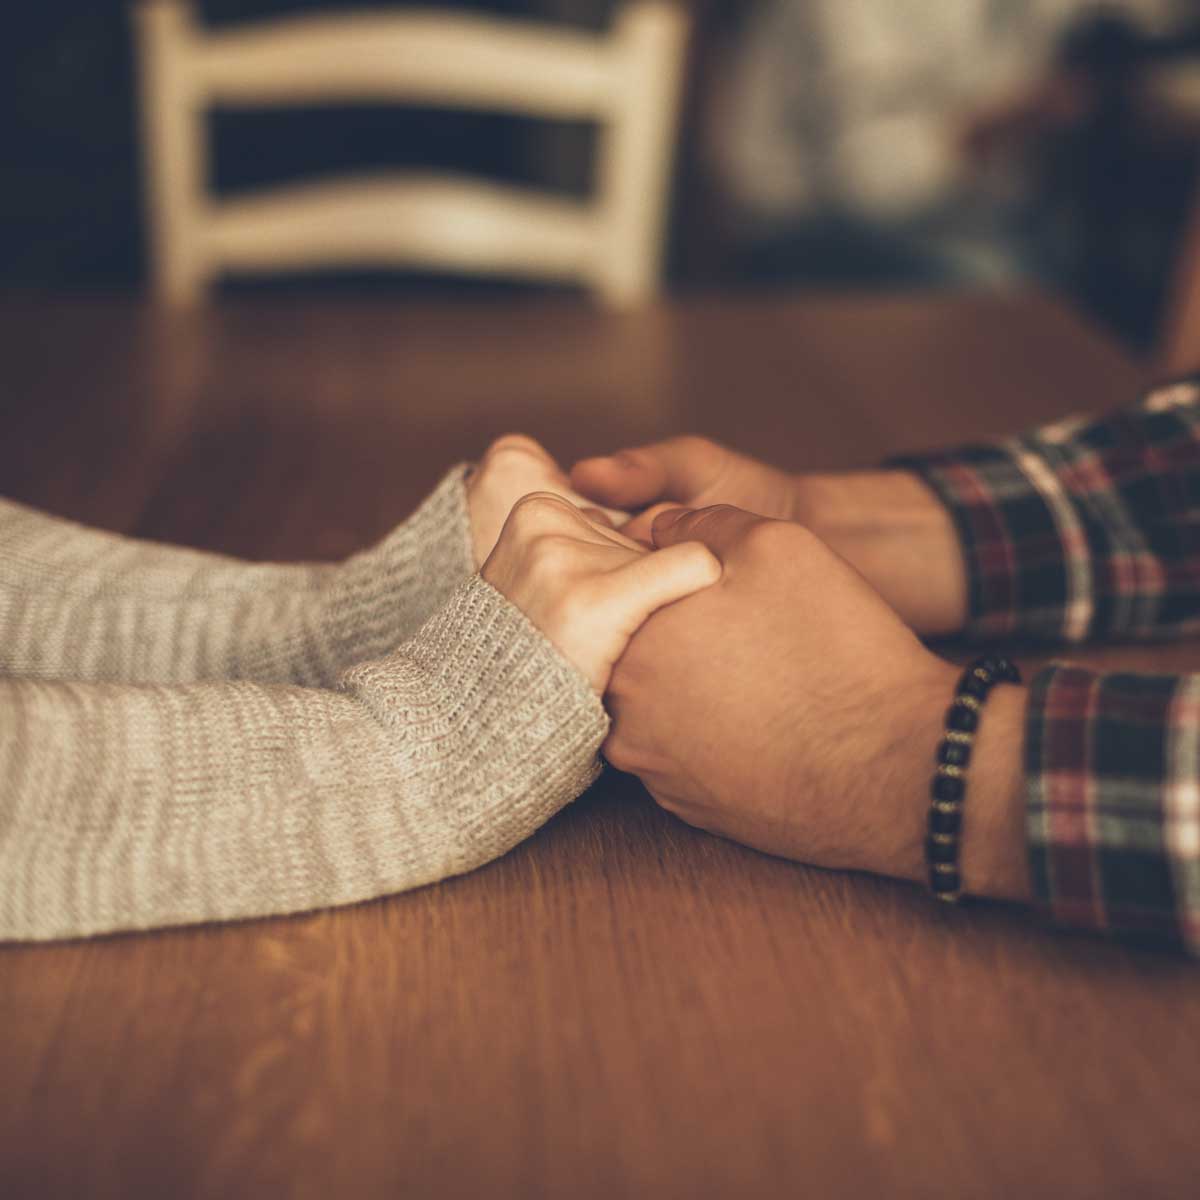 Couple in love holding hands in a cafe. Focus on hands.